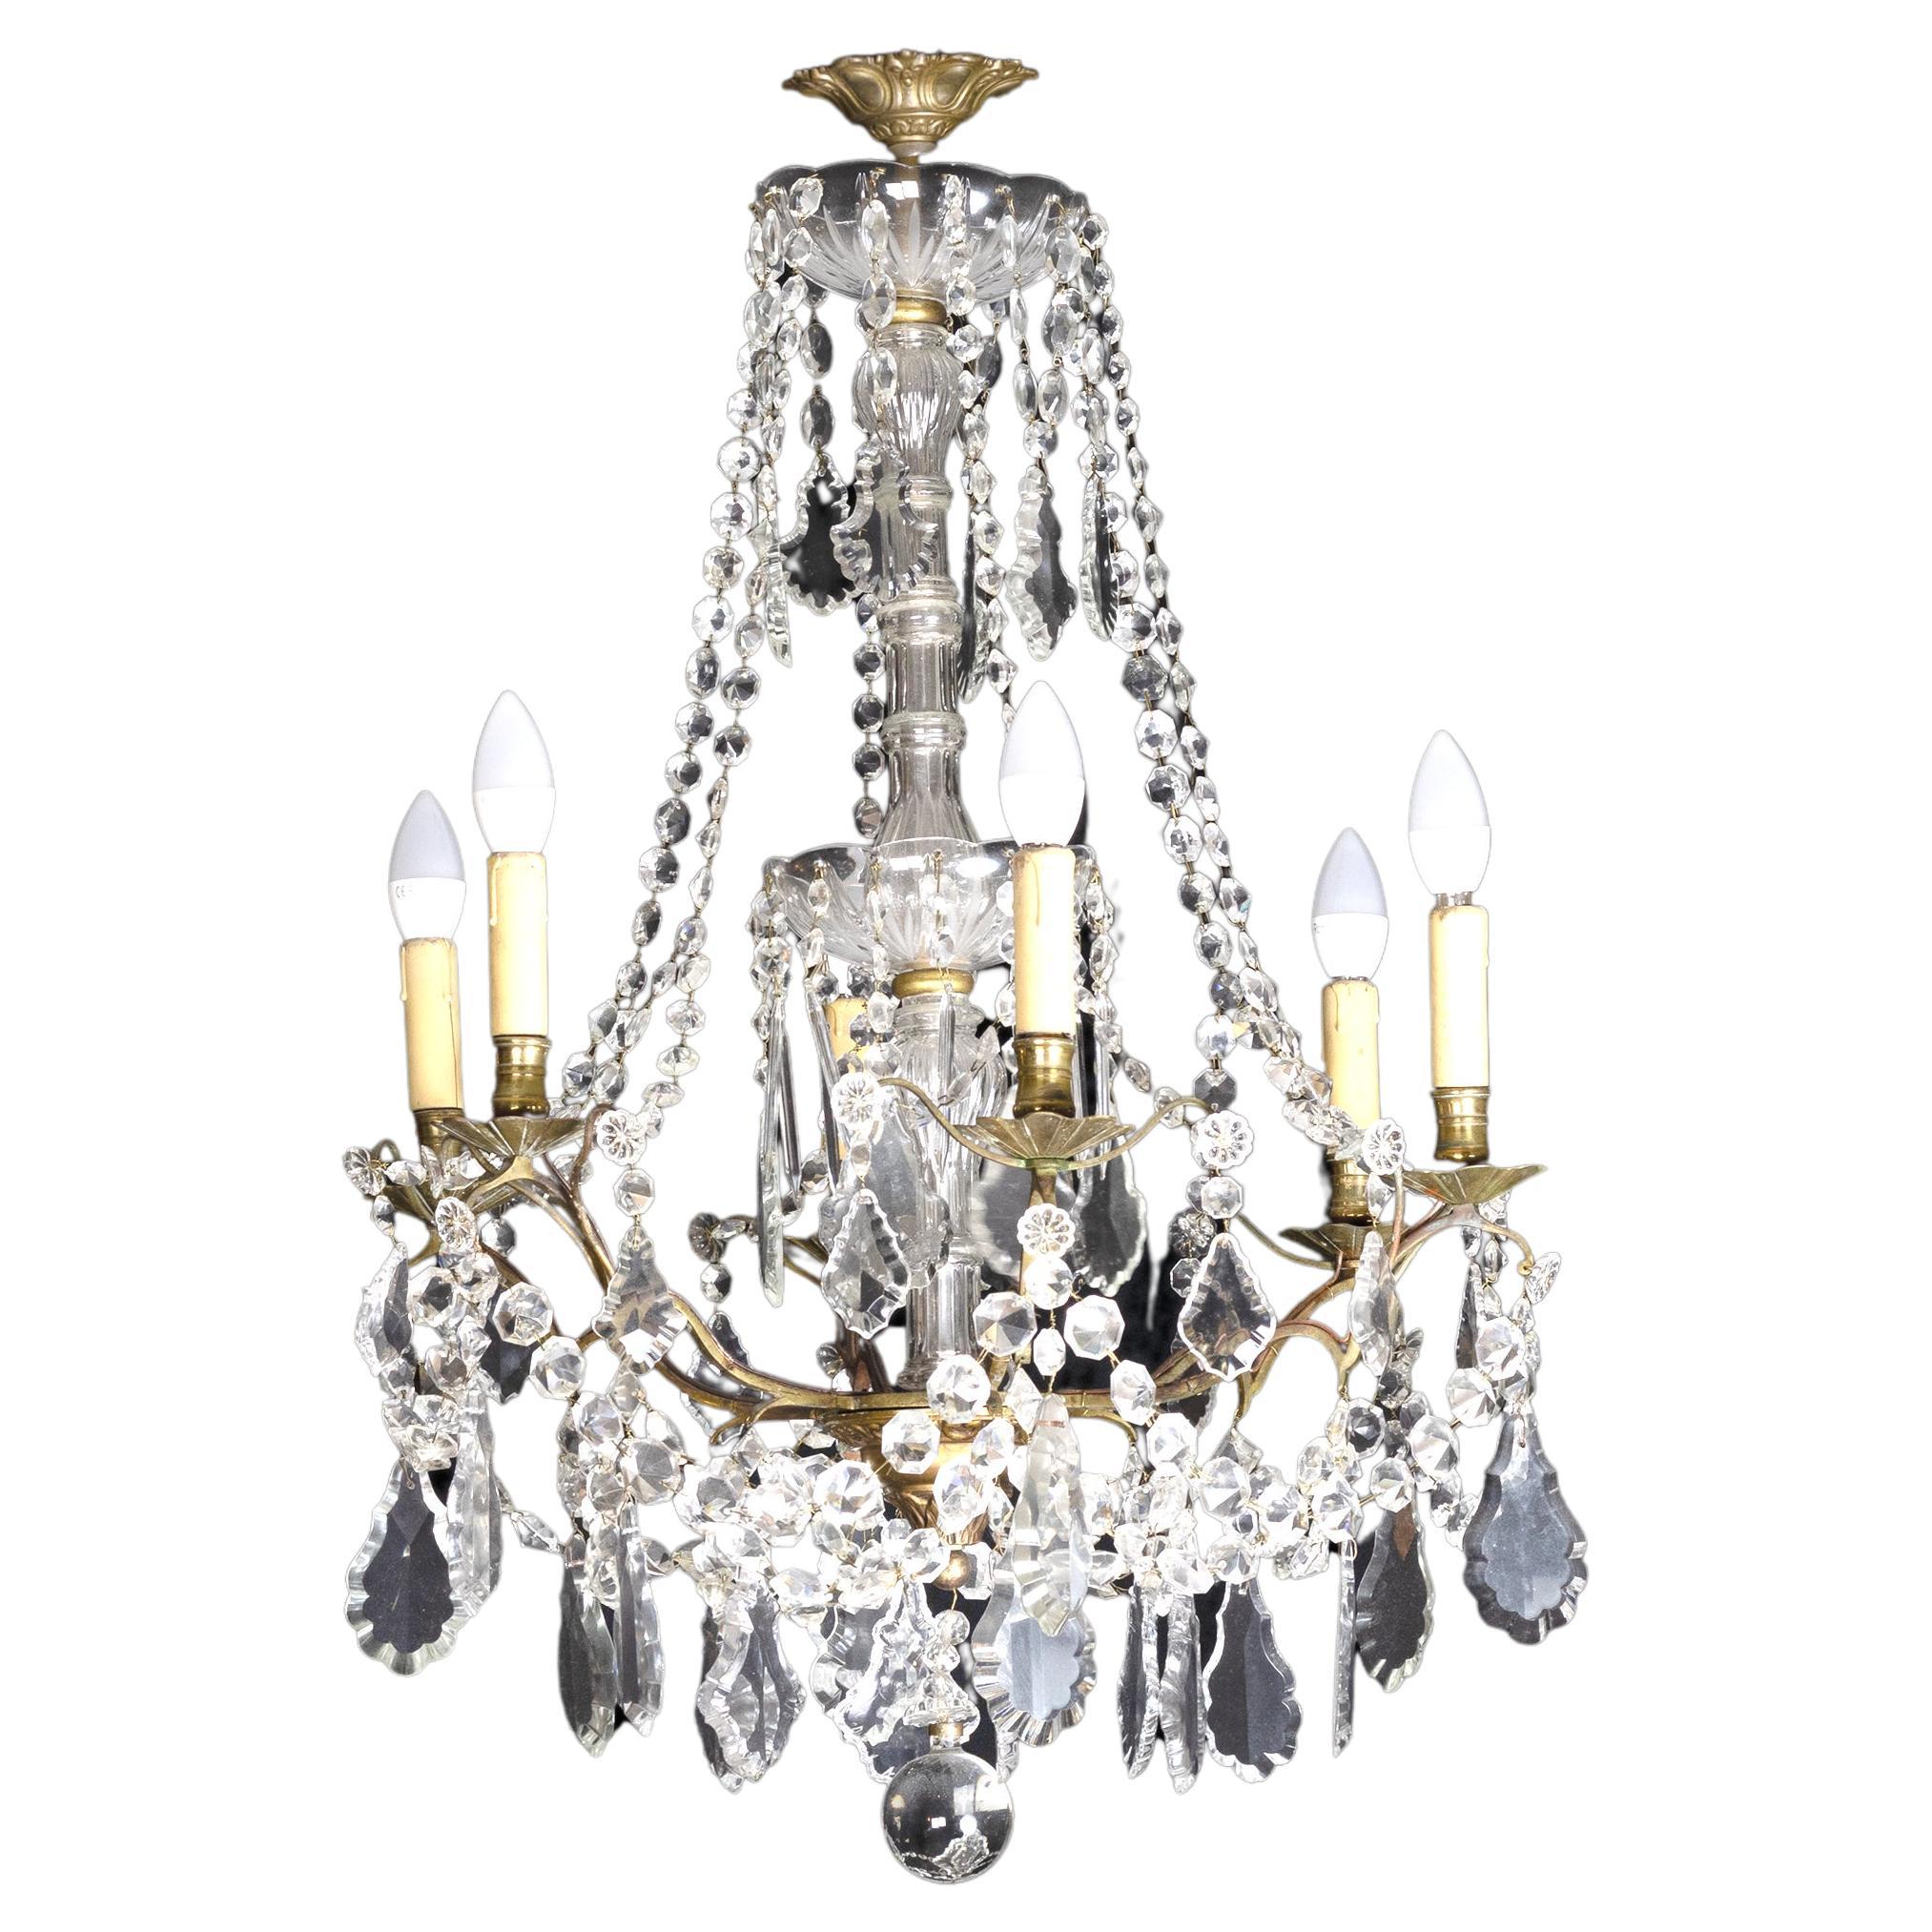 Maria Thereza Style Six Arms Glass Chandelier, 20th Century For Sale